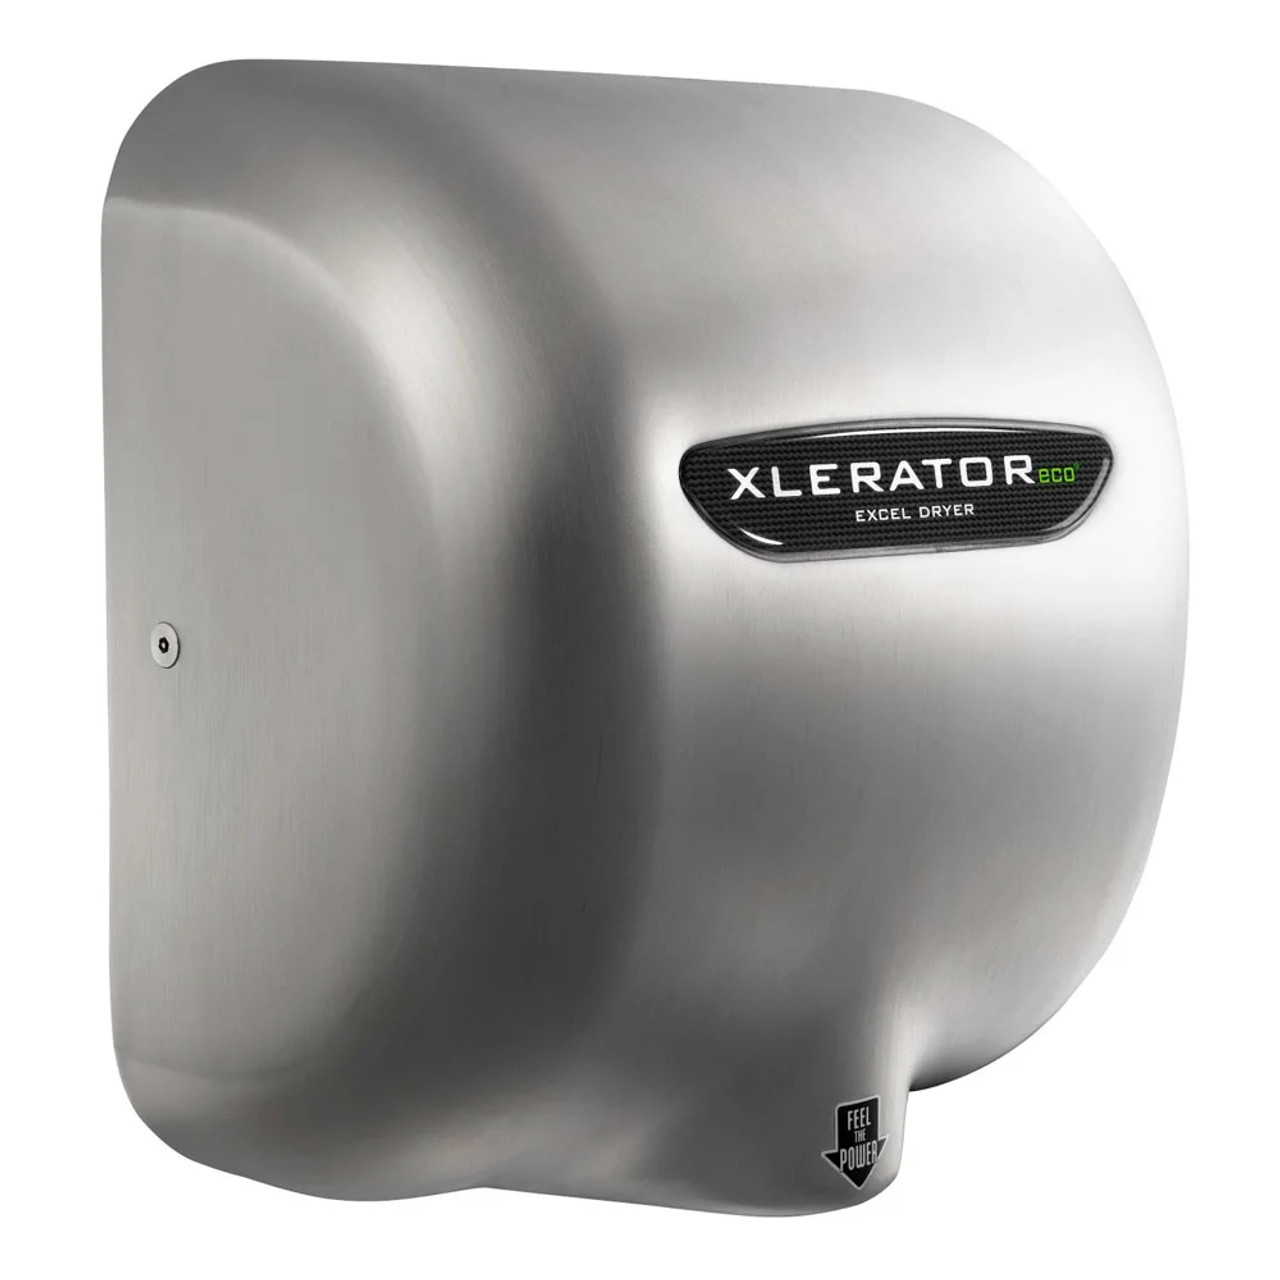 Excel Dryer Automatic Hand Dryer - 10 Second Dry Time, Noise Reduction, 110-120V - Chicken Pieces